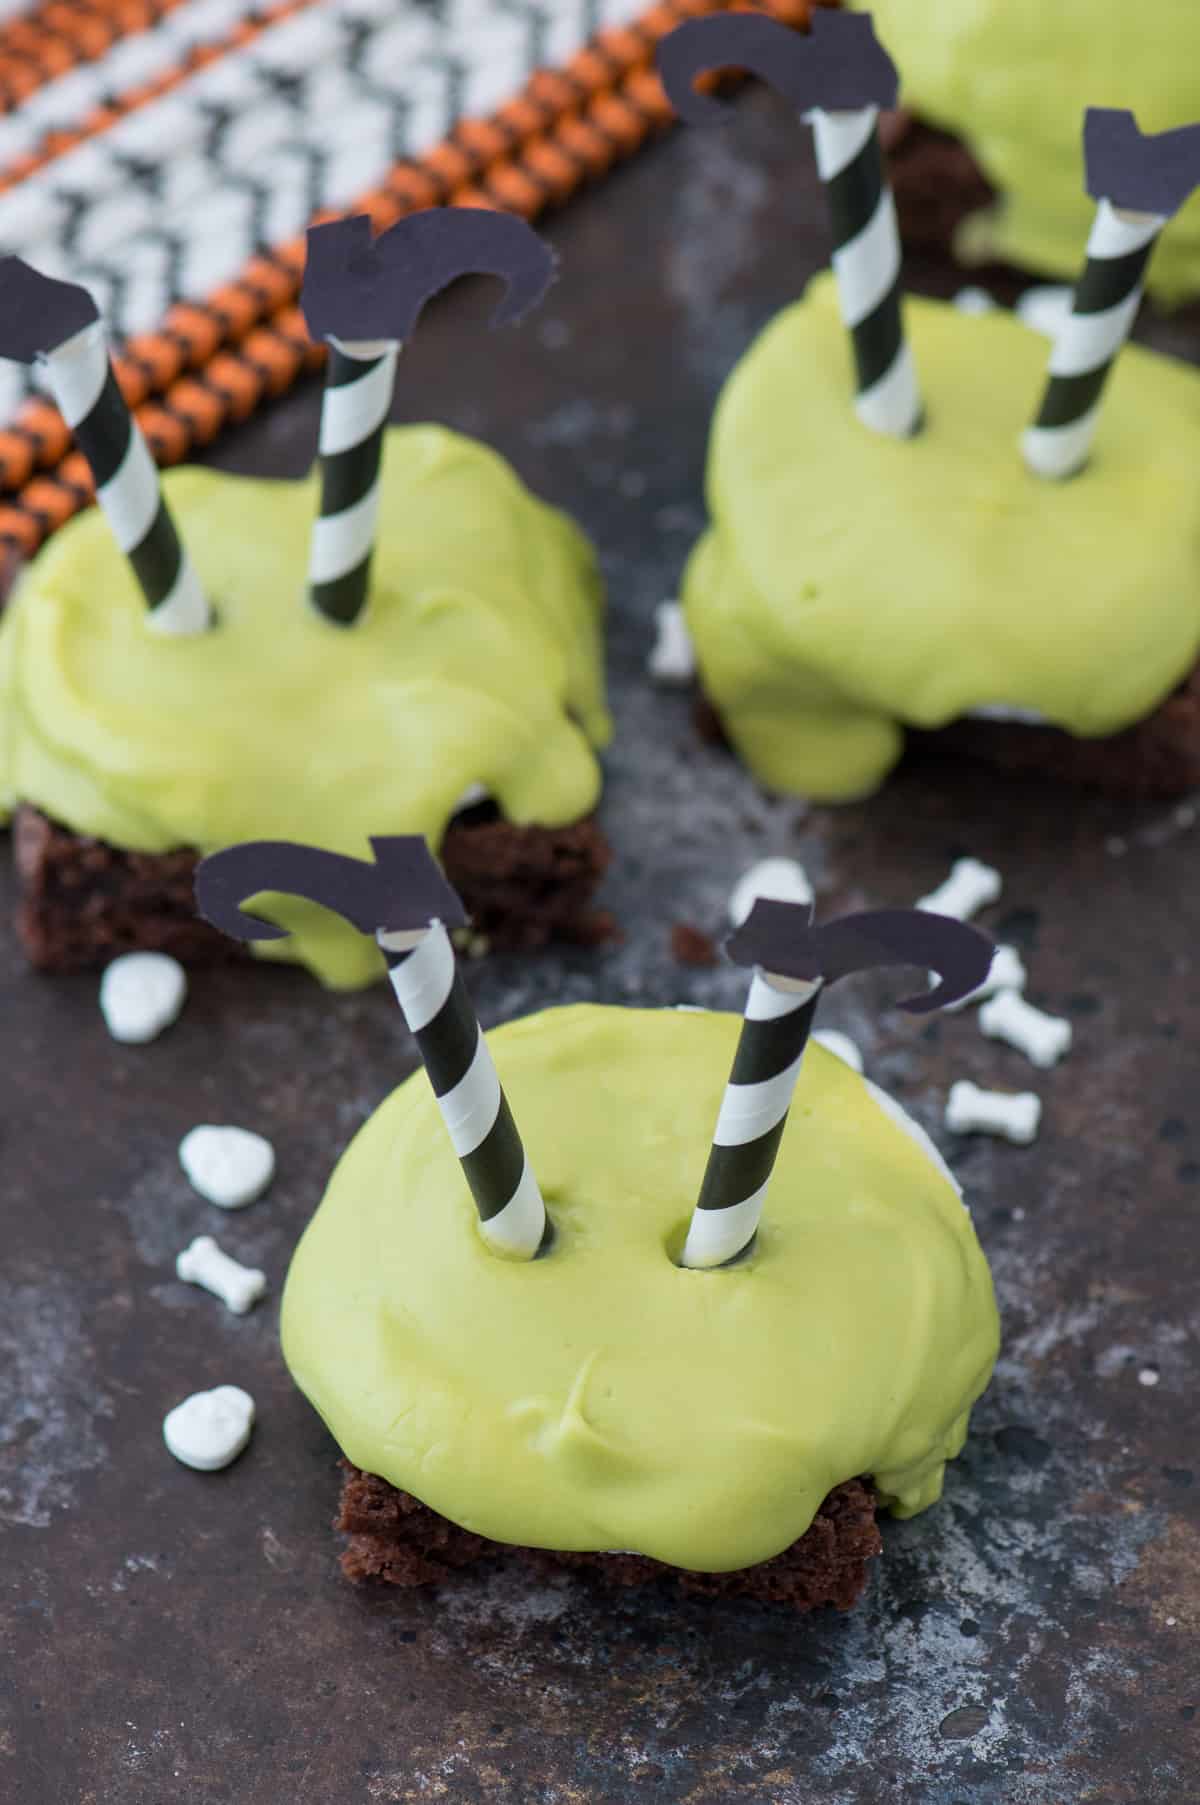 brownie square with green chocolate dripping over the side with striped witch's legs with black shoes stuck upside down in the chocolate